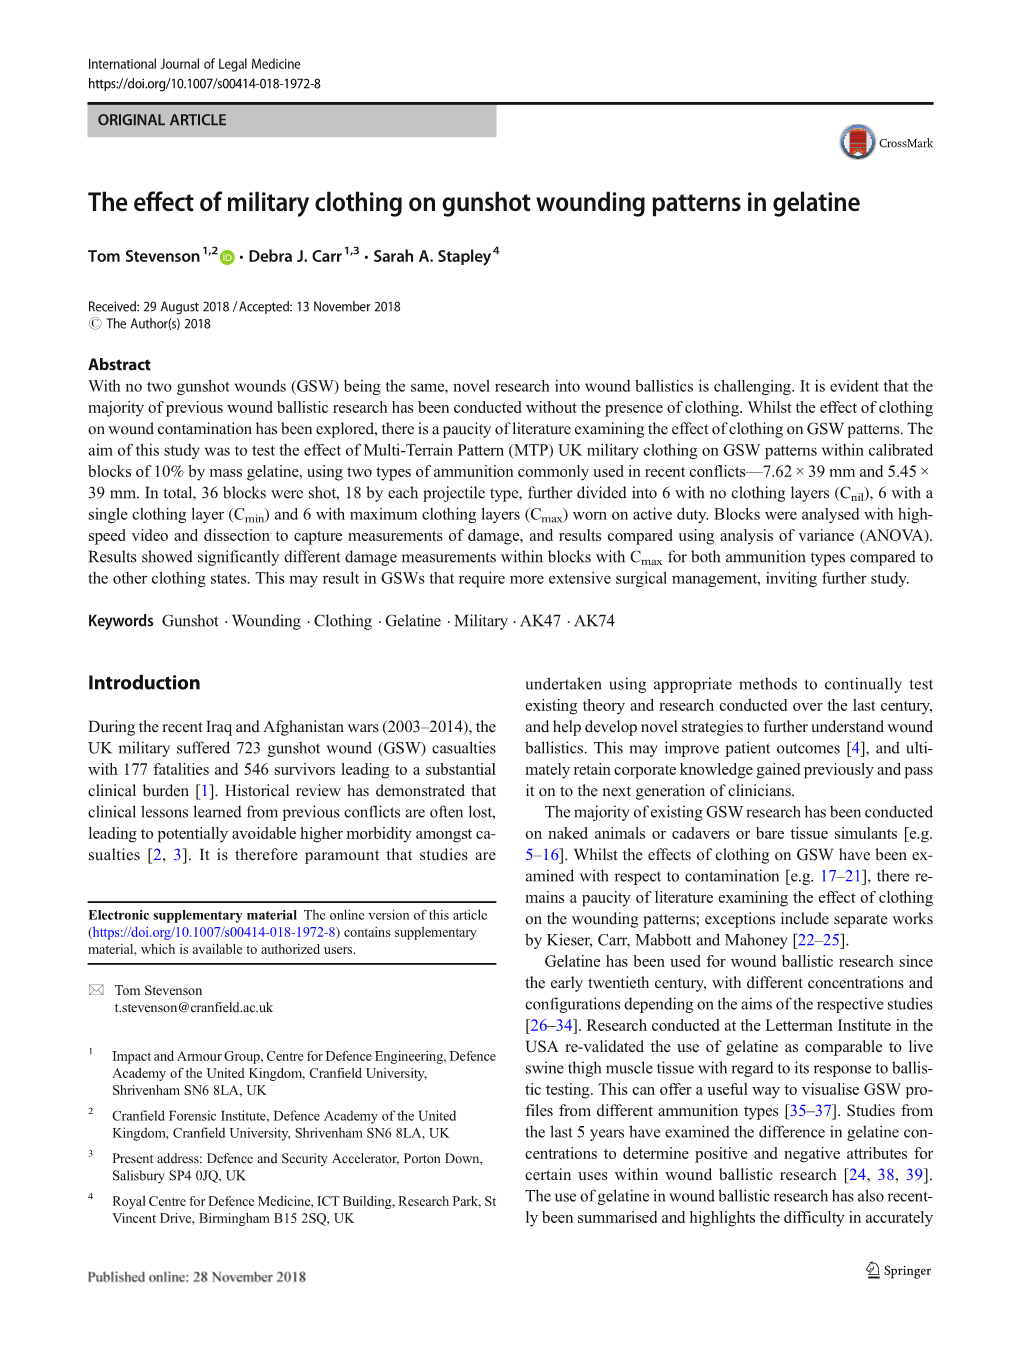 The Effect of Military Clothing on Gunshot Wounding Patterns in Gelatine